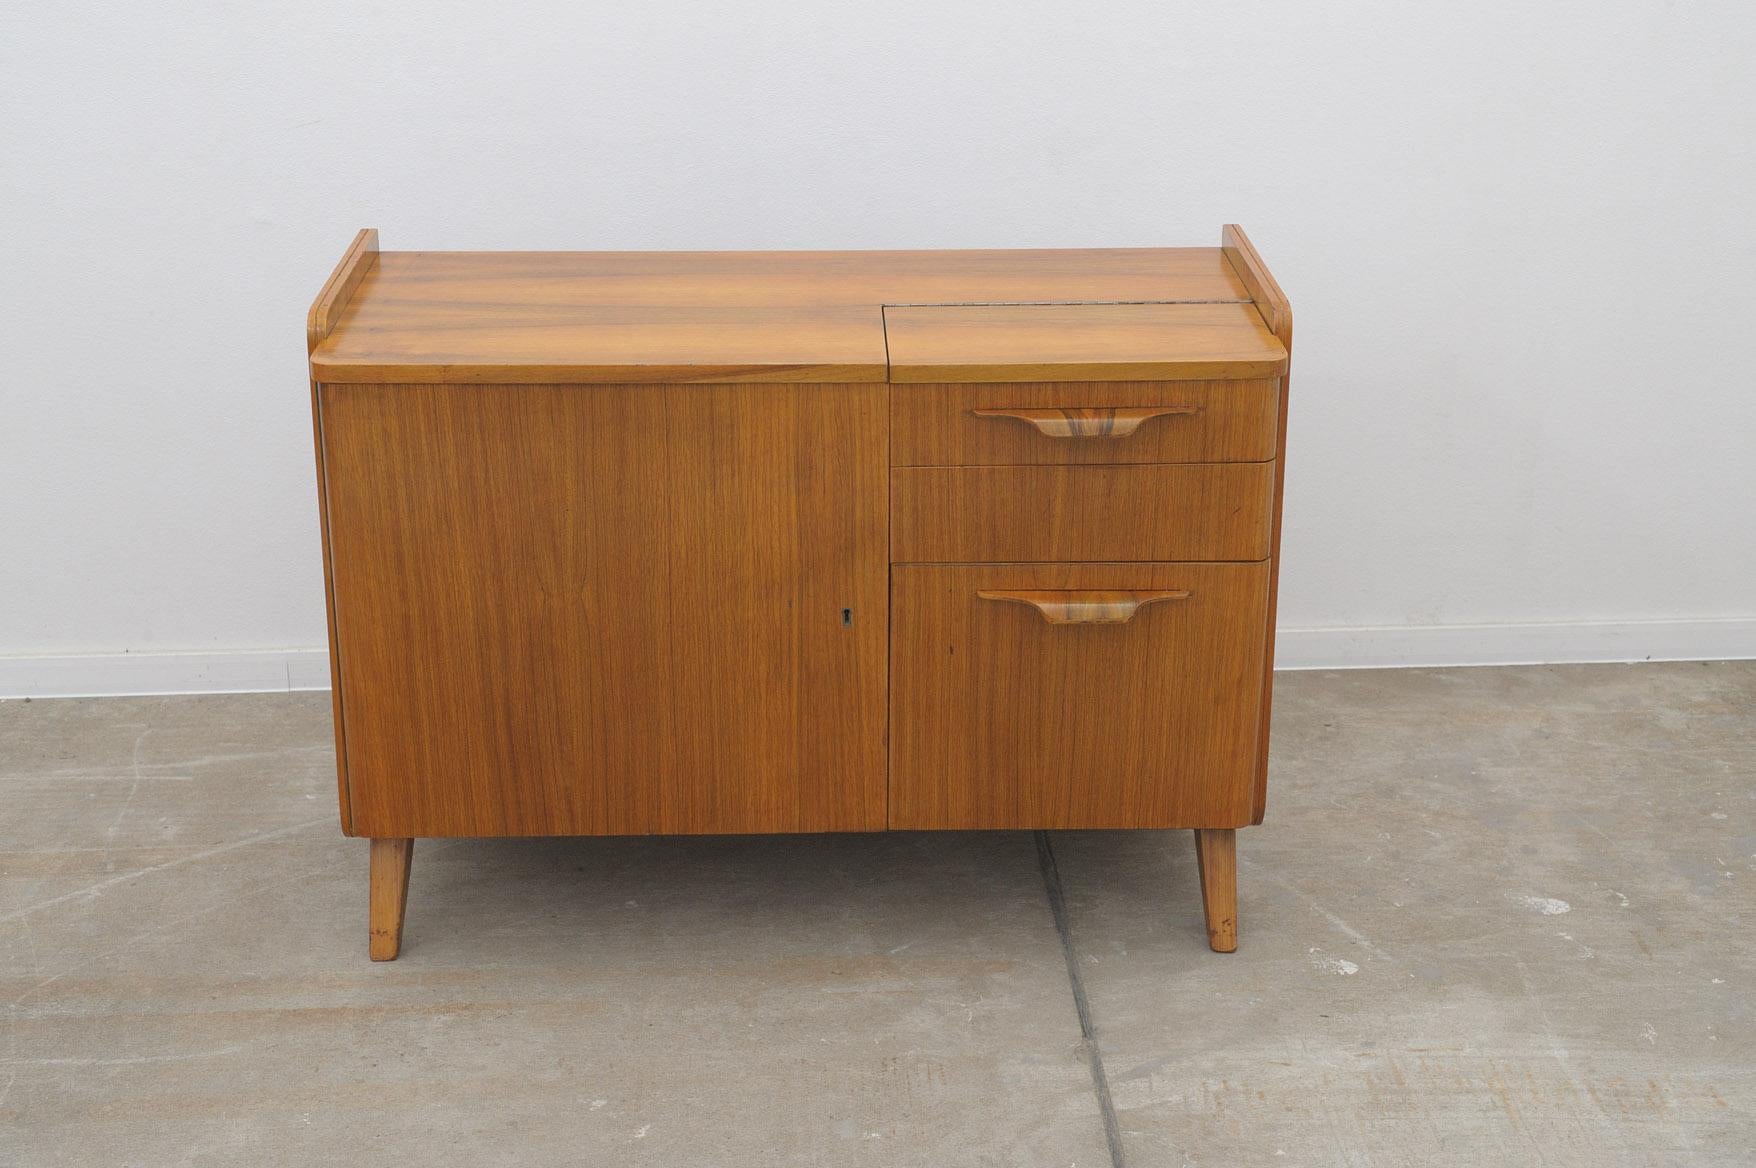 Mid century Vintage small cabinet or TV table from the 1960´s. It was designed by František Jirák and was manufactured by Tatra nábytok company in the former Czechoslovakia. Walnut veneer, plywood. In very good condition with slight signs of age and